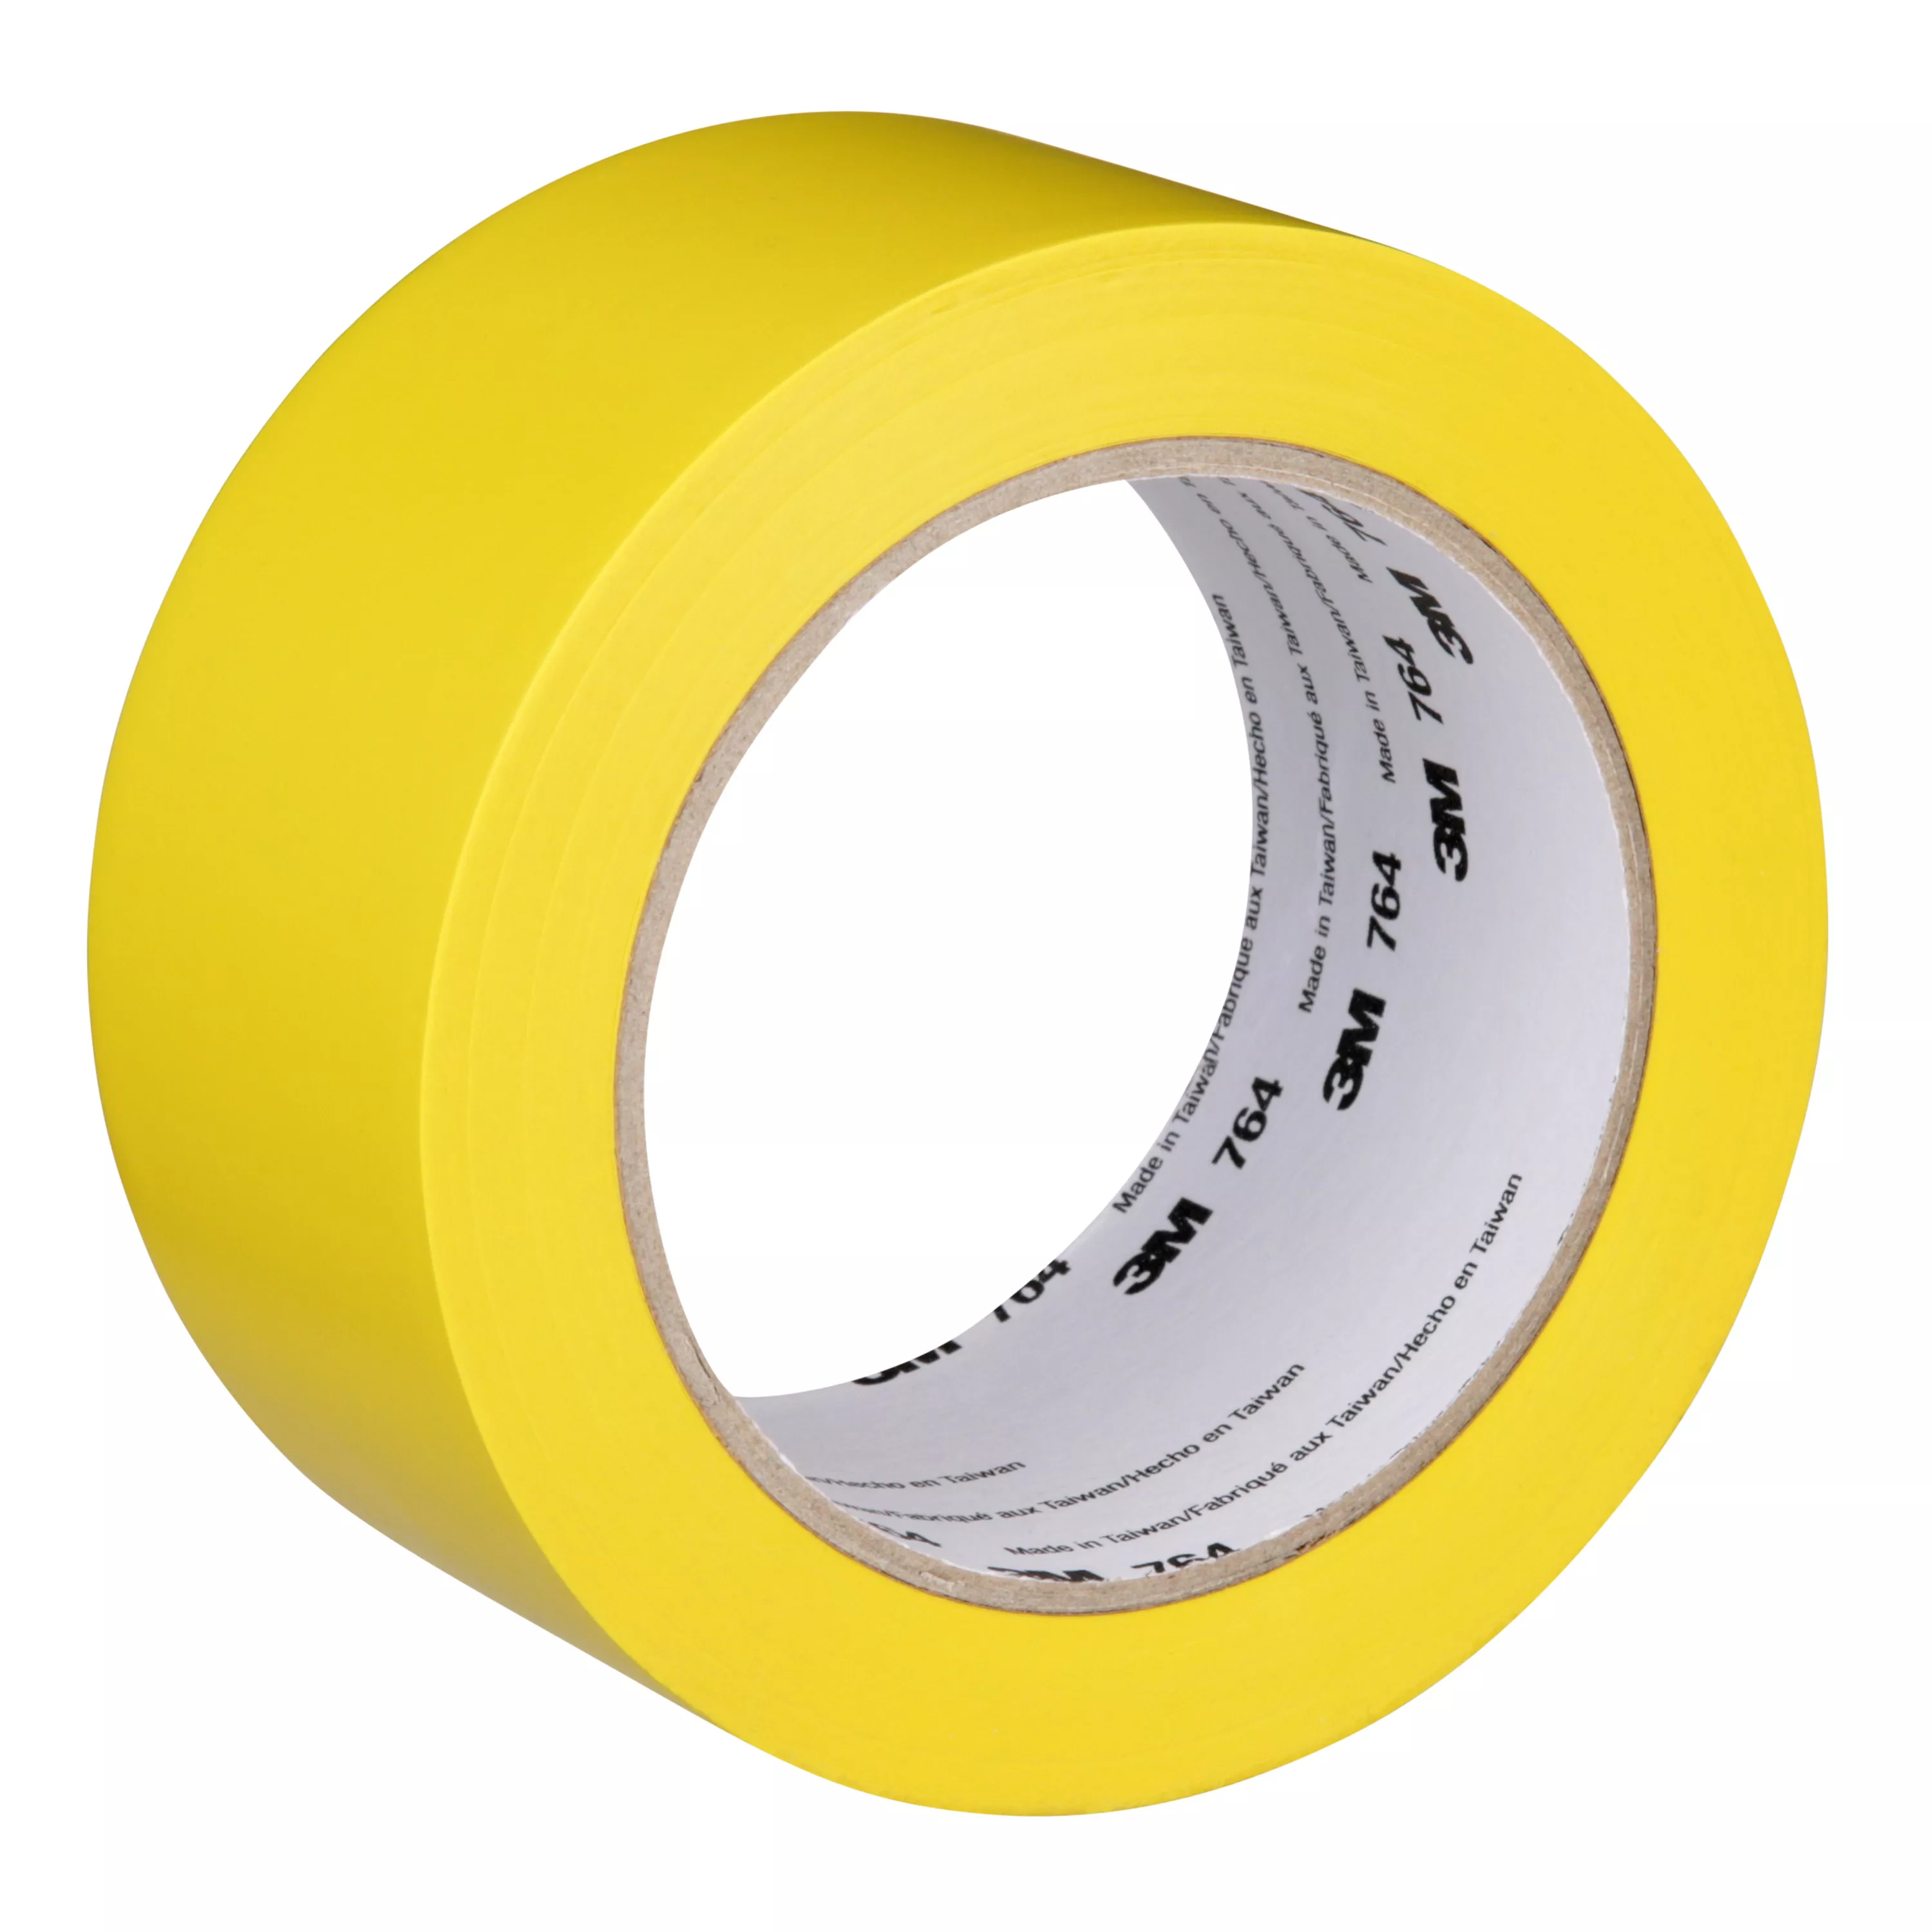 3M™ General Purpose Vinyl Tape 764, Yellow, 2 in x 36 yd, 5 mil, 24 Roll/Case, Individually Wrapped Conveniently Packaged